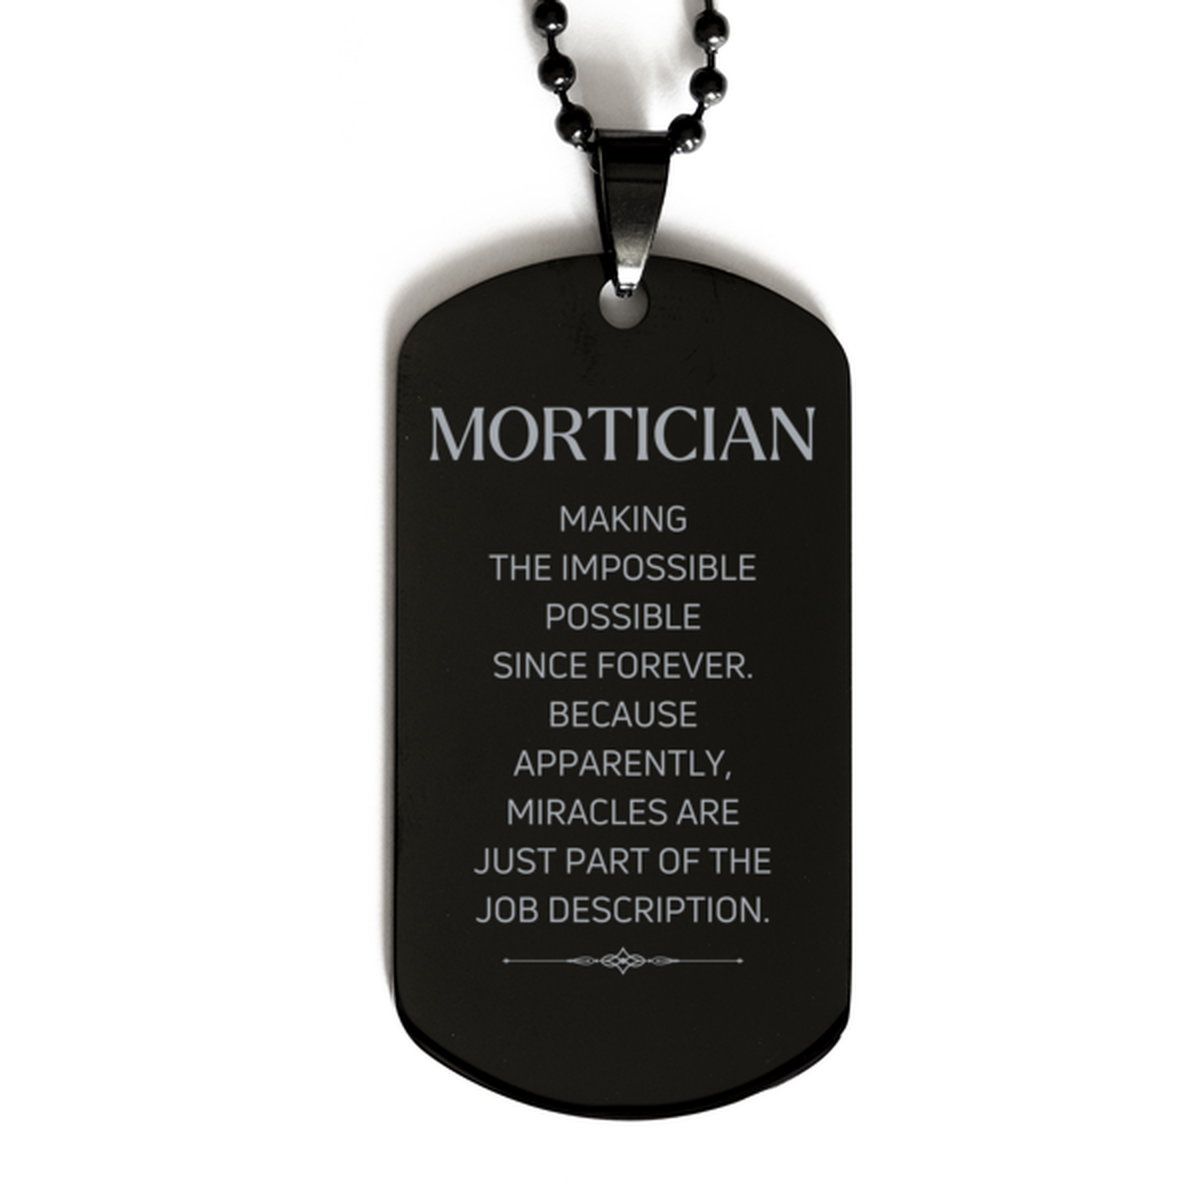 Funny Mortician Gifts, Miracles are just part of the job description, Inspirational Birthday Black Dog Tag For Mortician, Men, Women, Coworkers, Friends, Boss